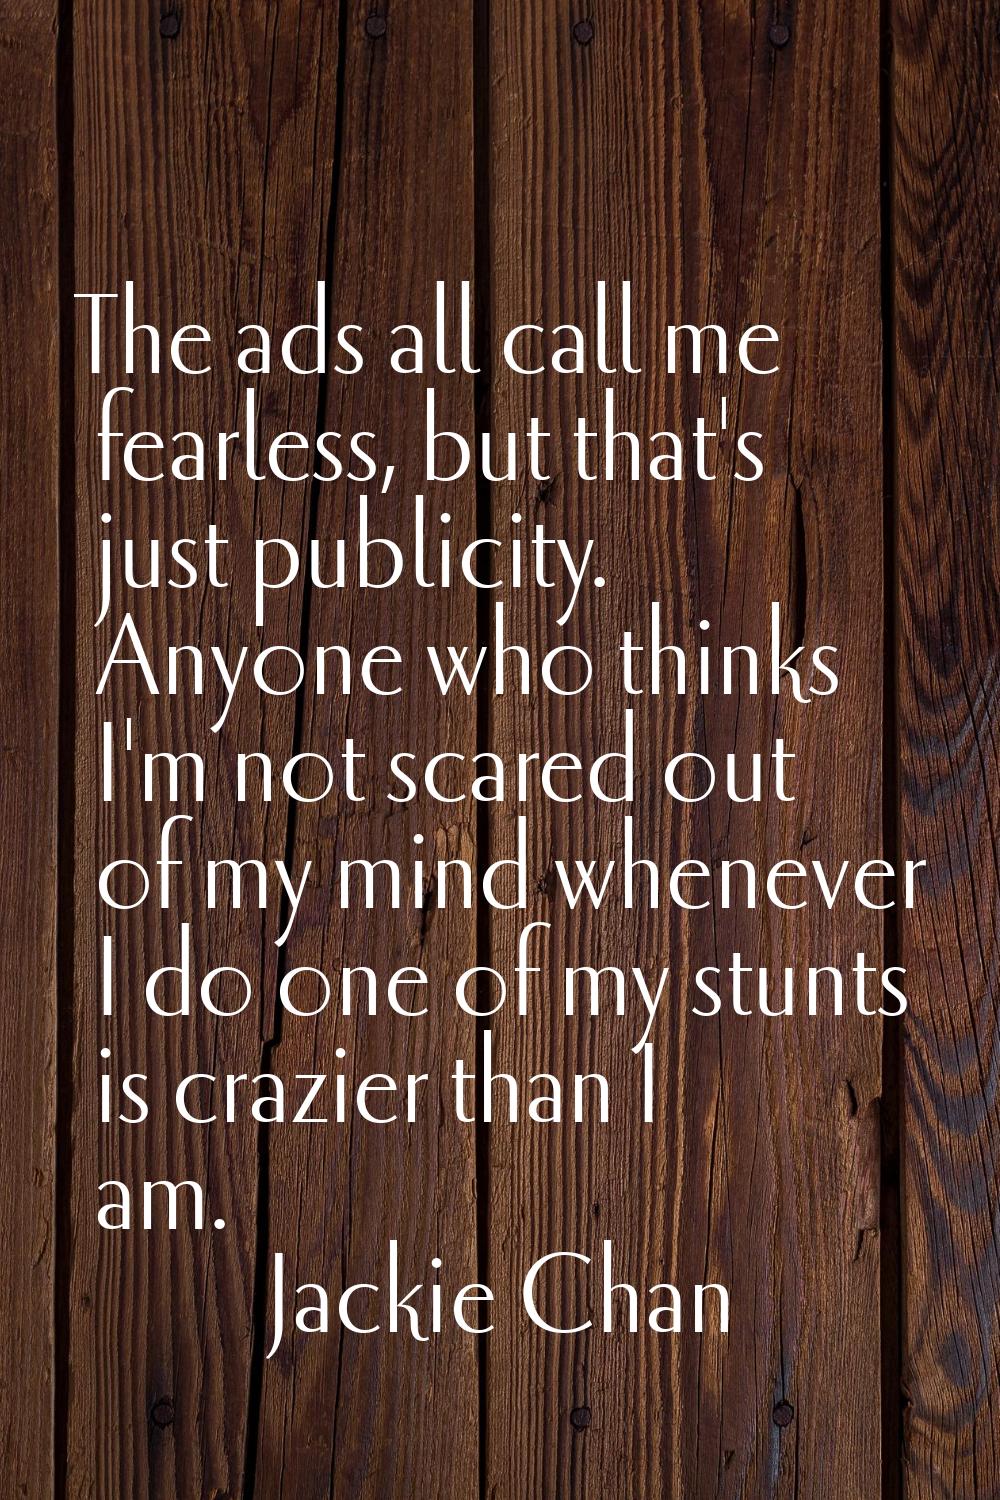 The ads all call me fearless, but that's just publicity. Anyone who thinks I'm not scared out of my